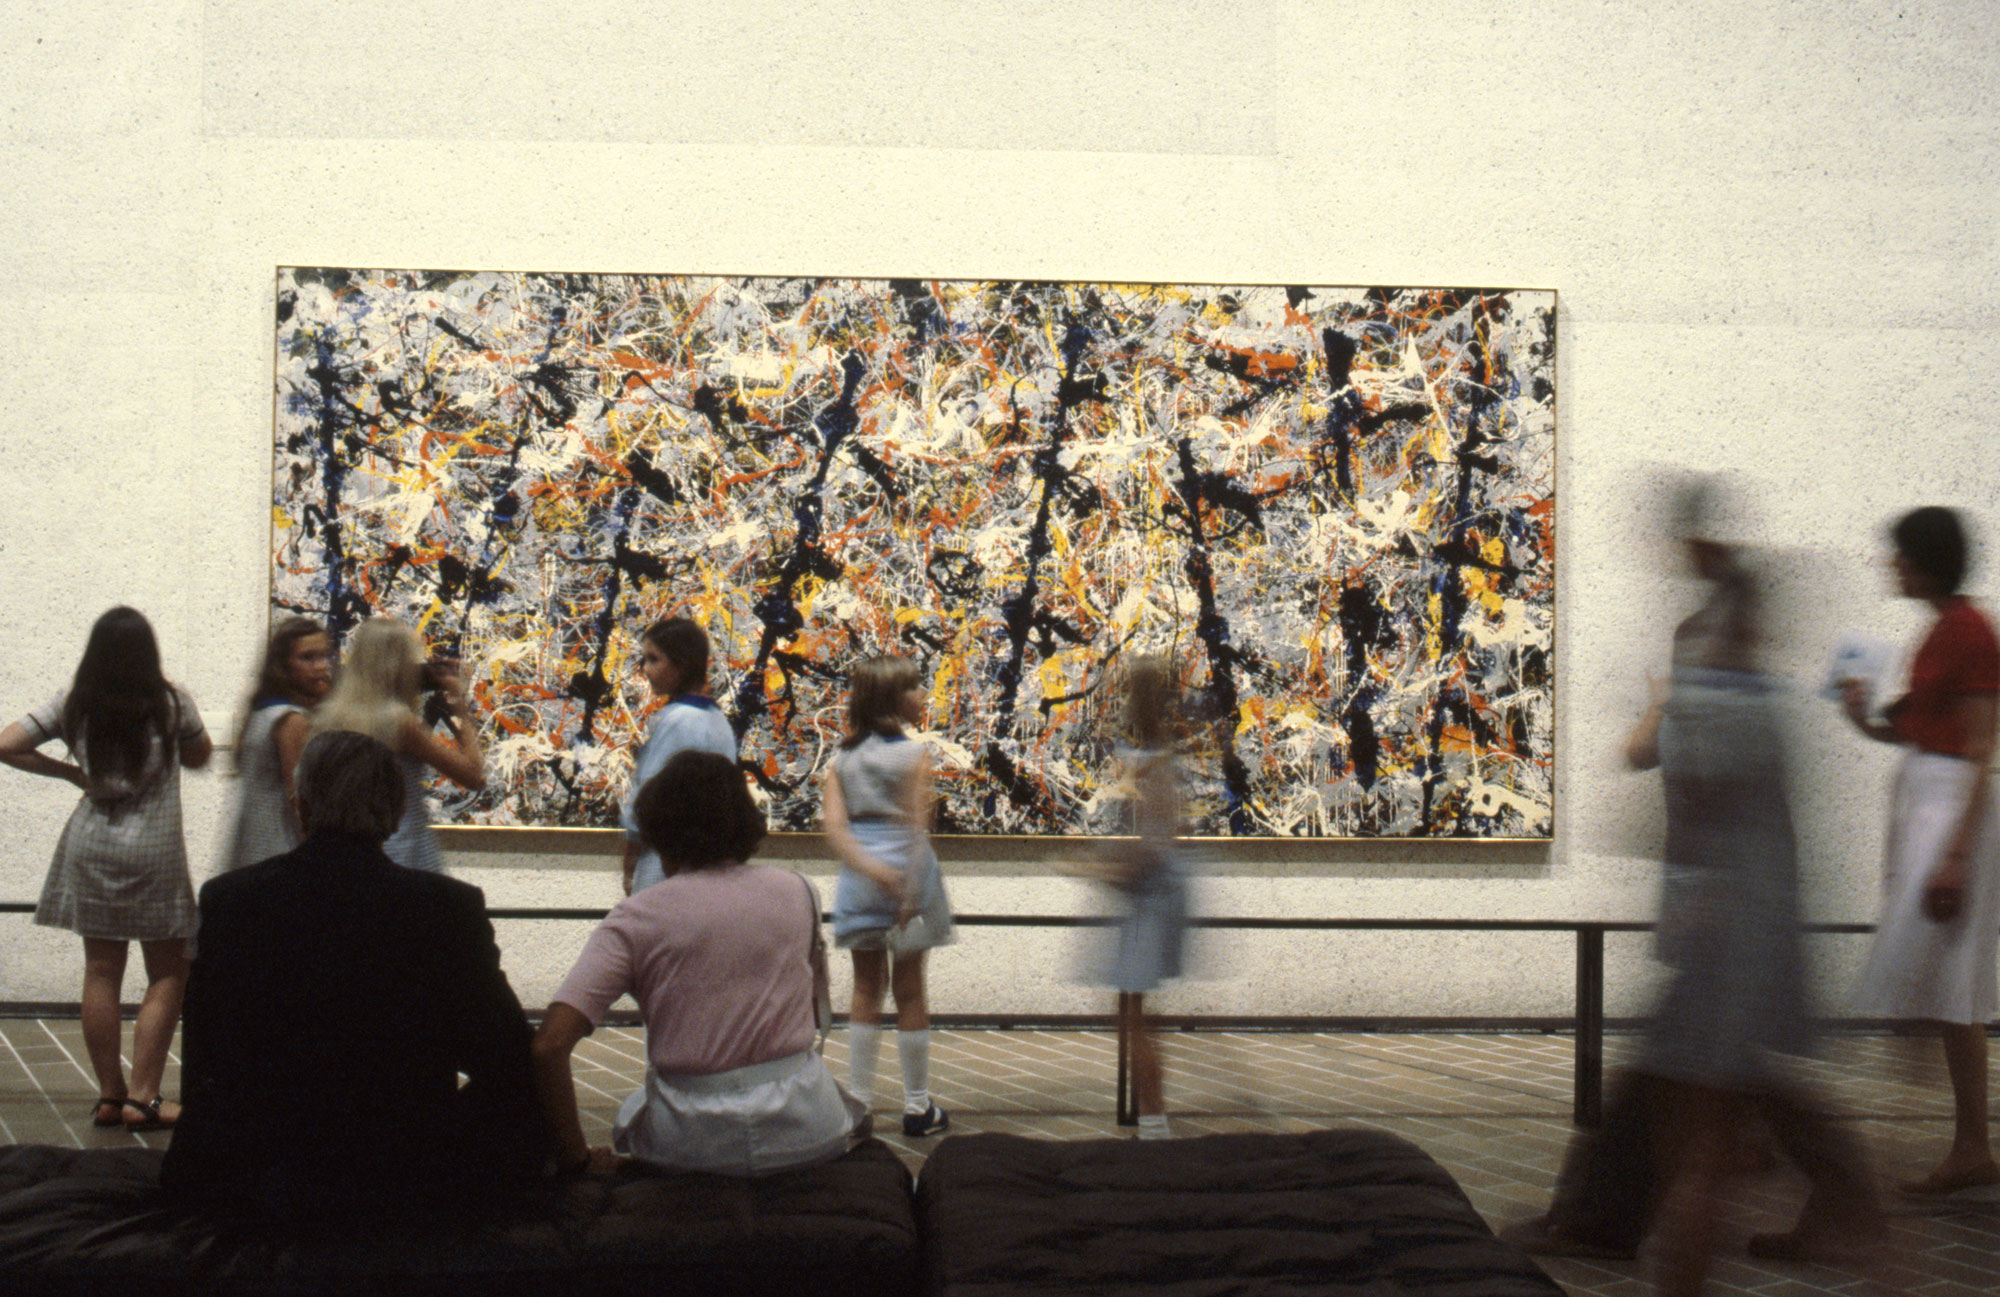 <p><em>Blue Poles</em> by Jackson Pollock on display at the National Gallery of Australia, 1982</p>
